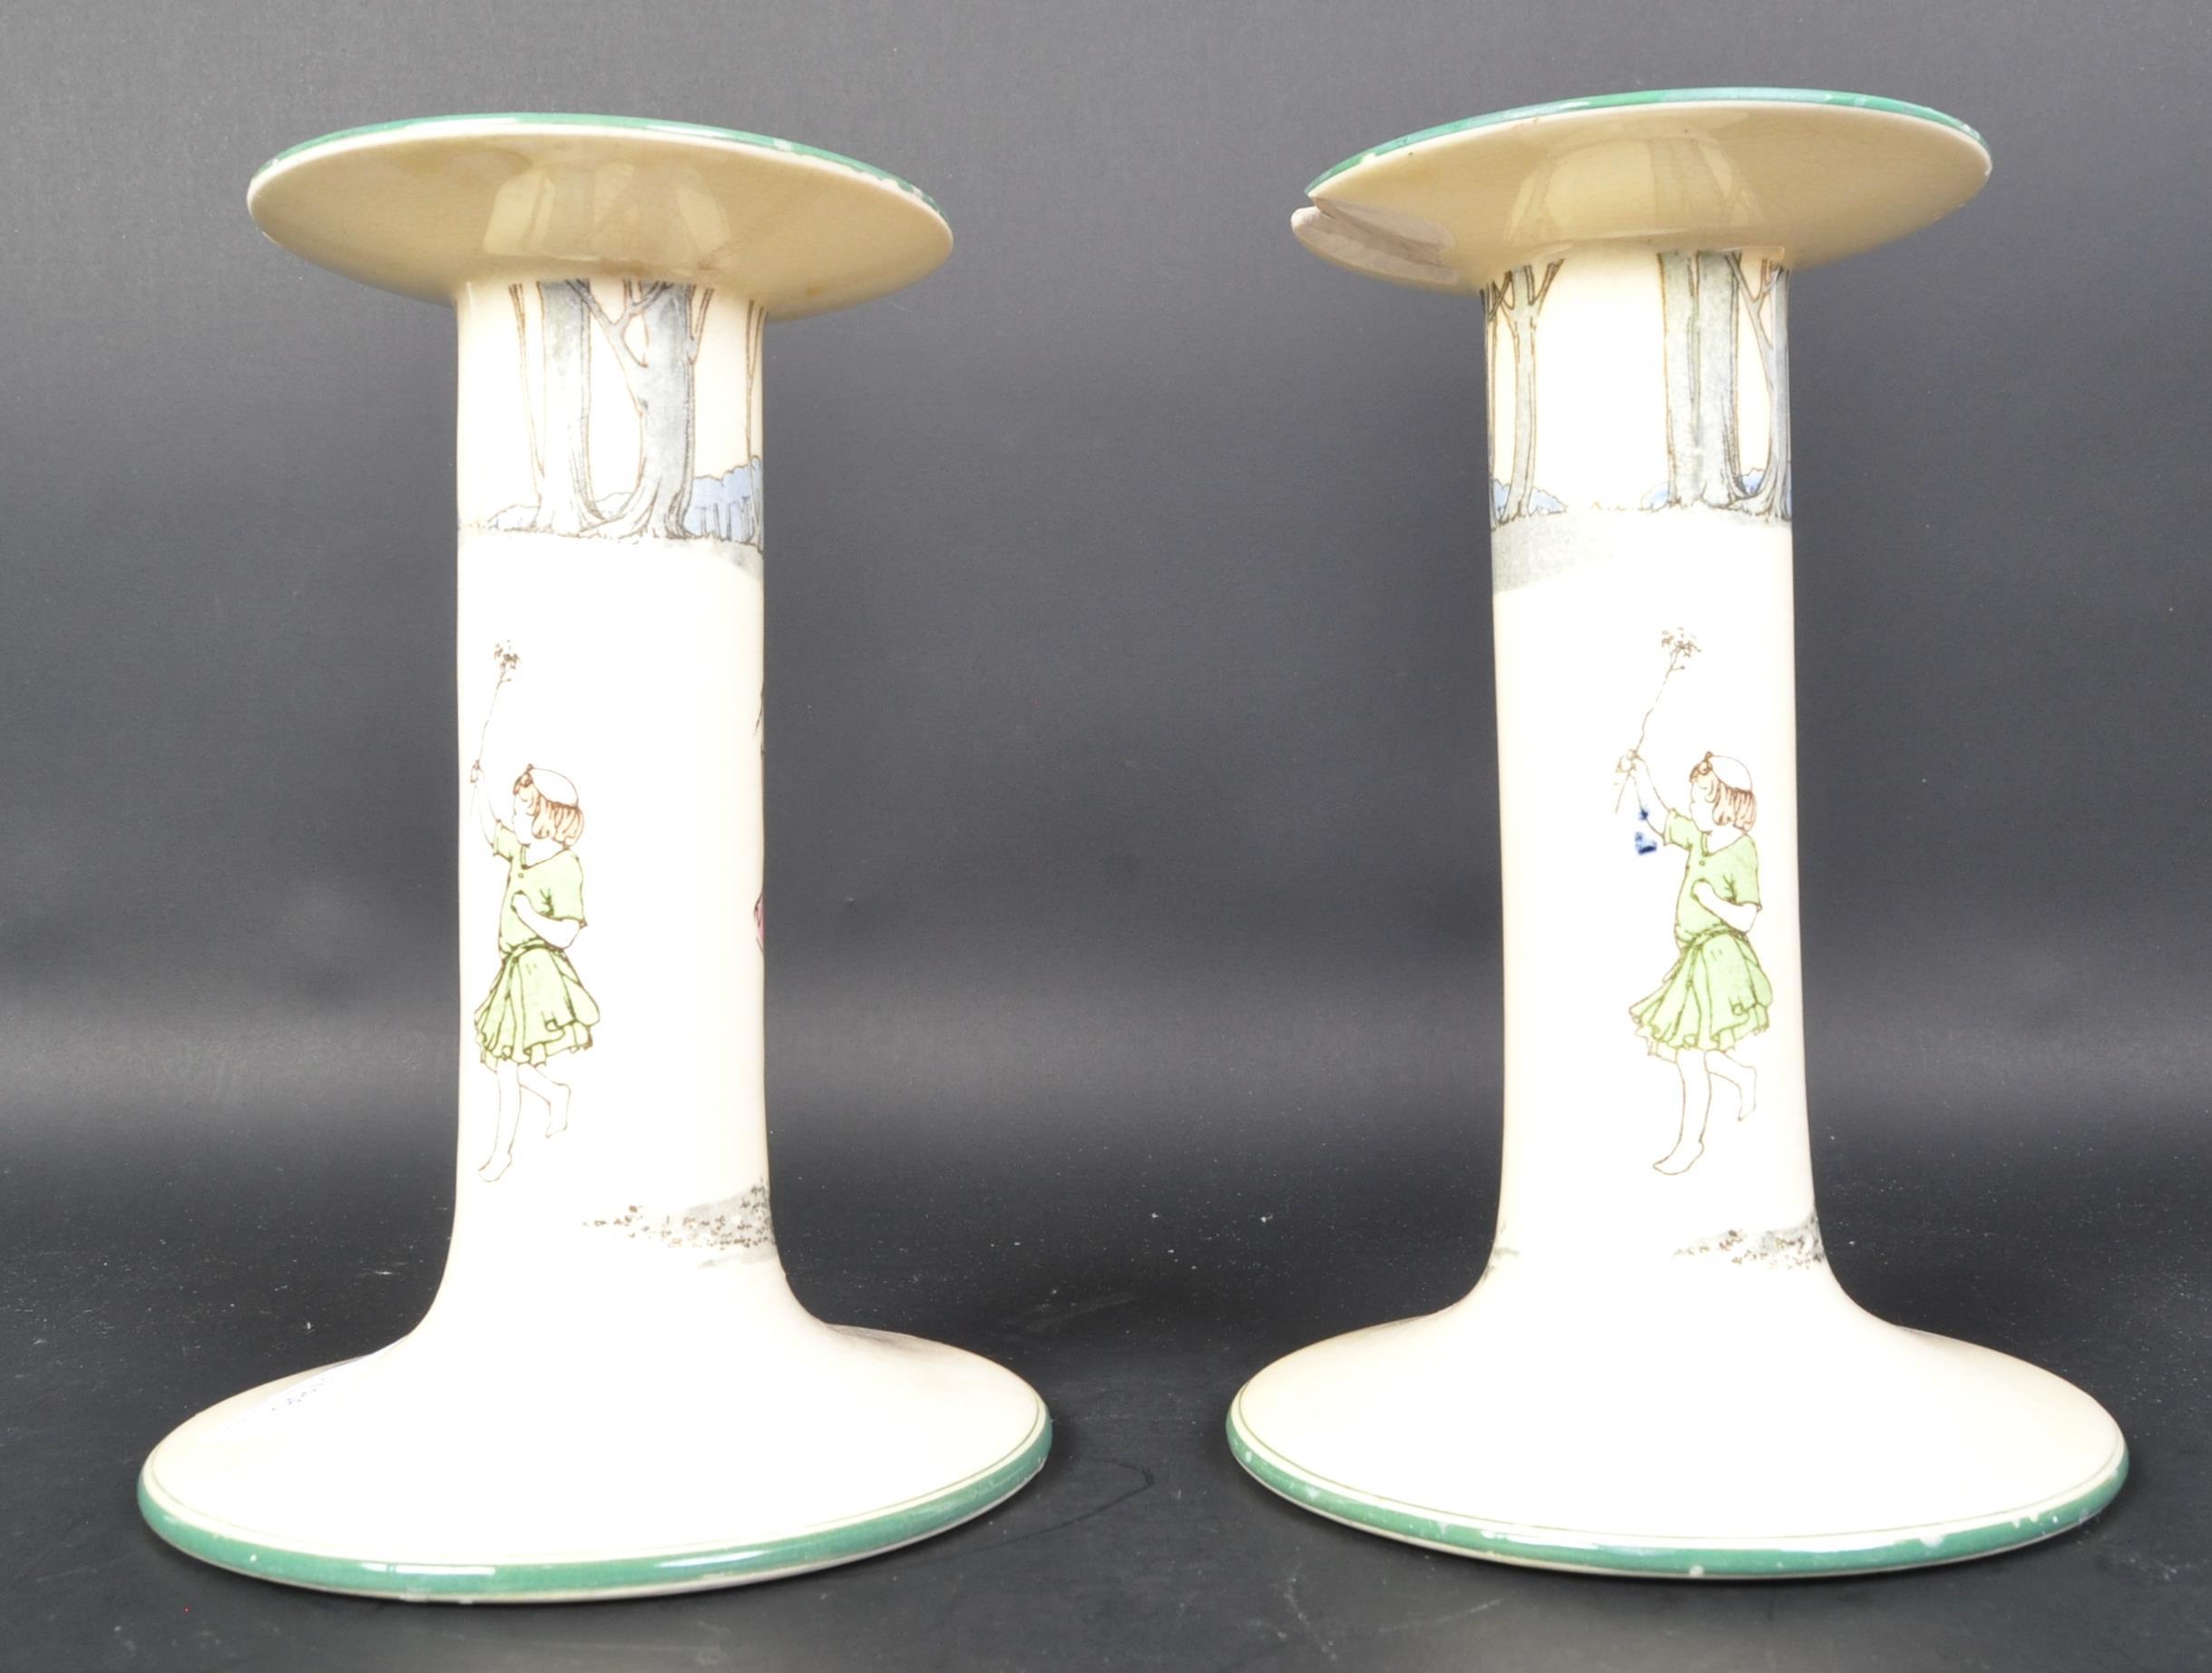 ROYAL DOULTON SERIES WARE CANDLE STICK HOLDERS - Image 3 of 5